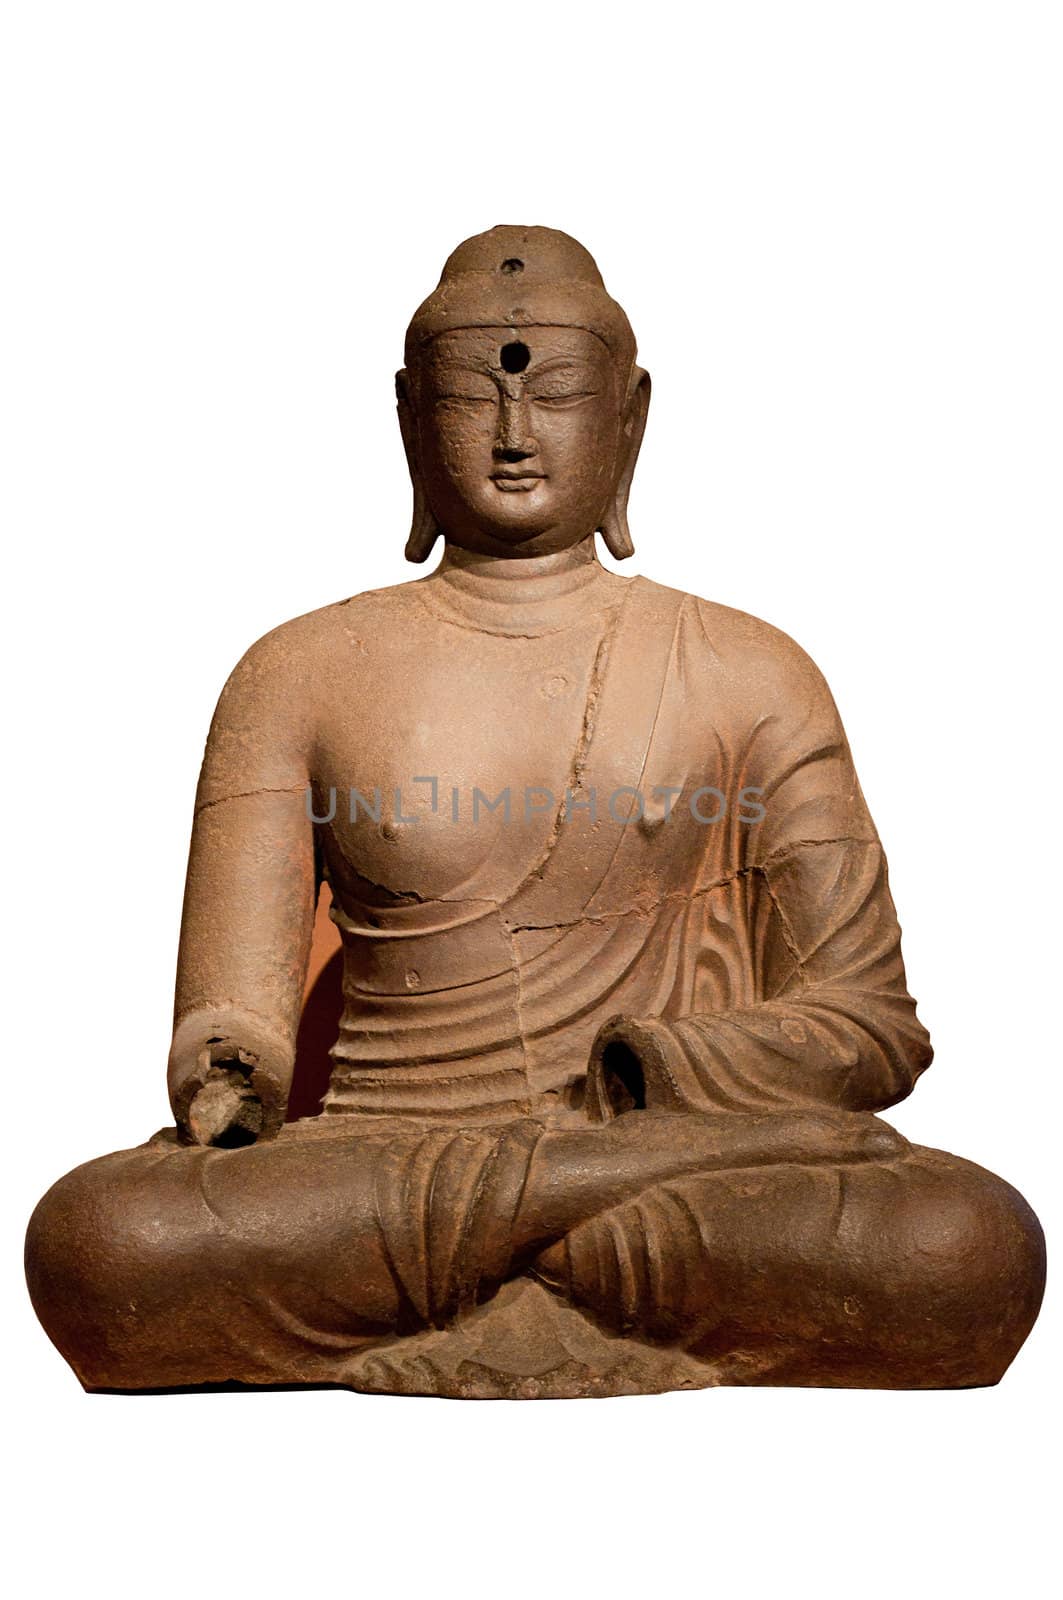 Buddha statue with isolated background